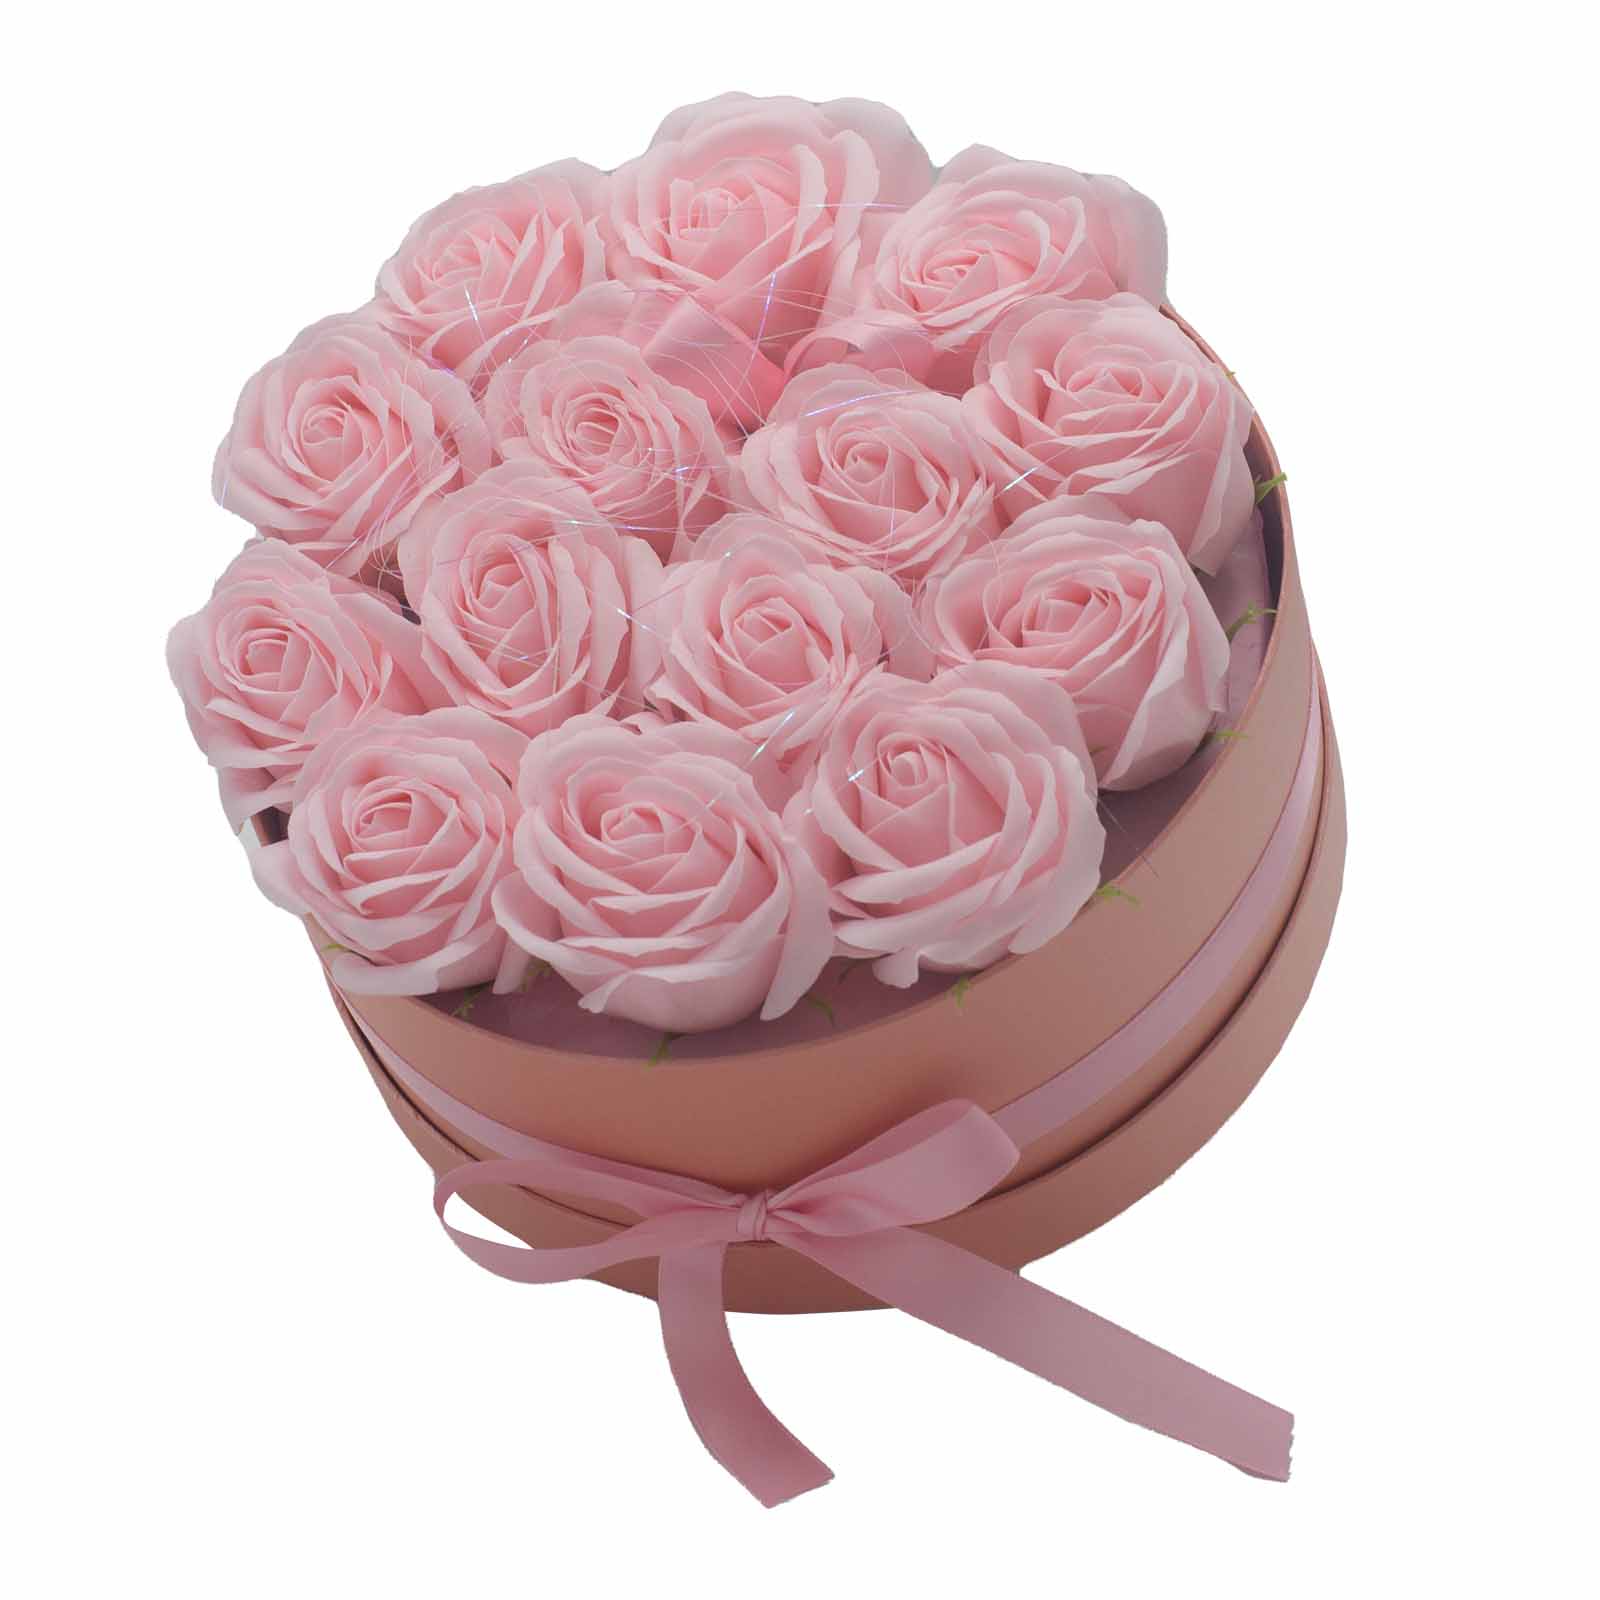 View Soap Flower Gift Bouquet 14 Pink Roses Round information